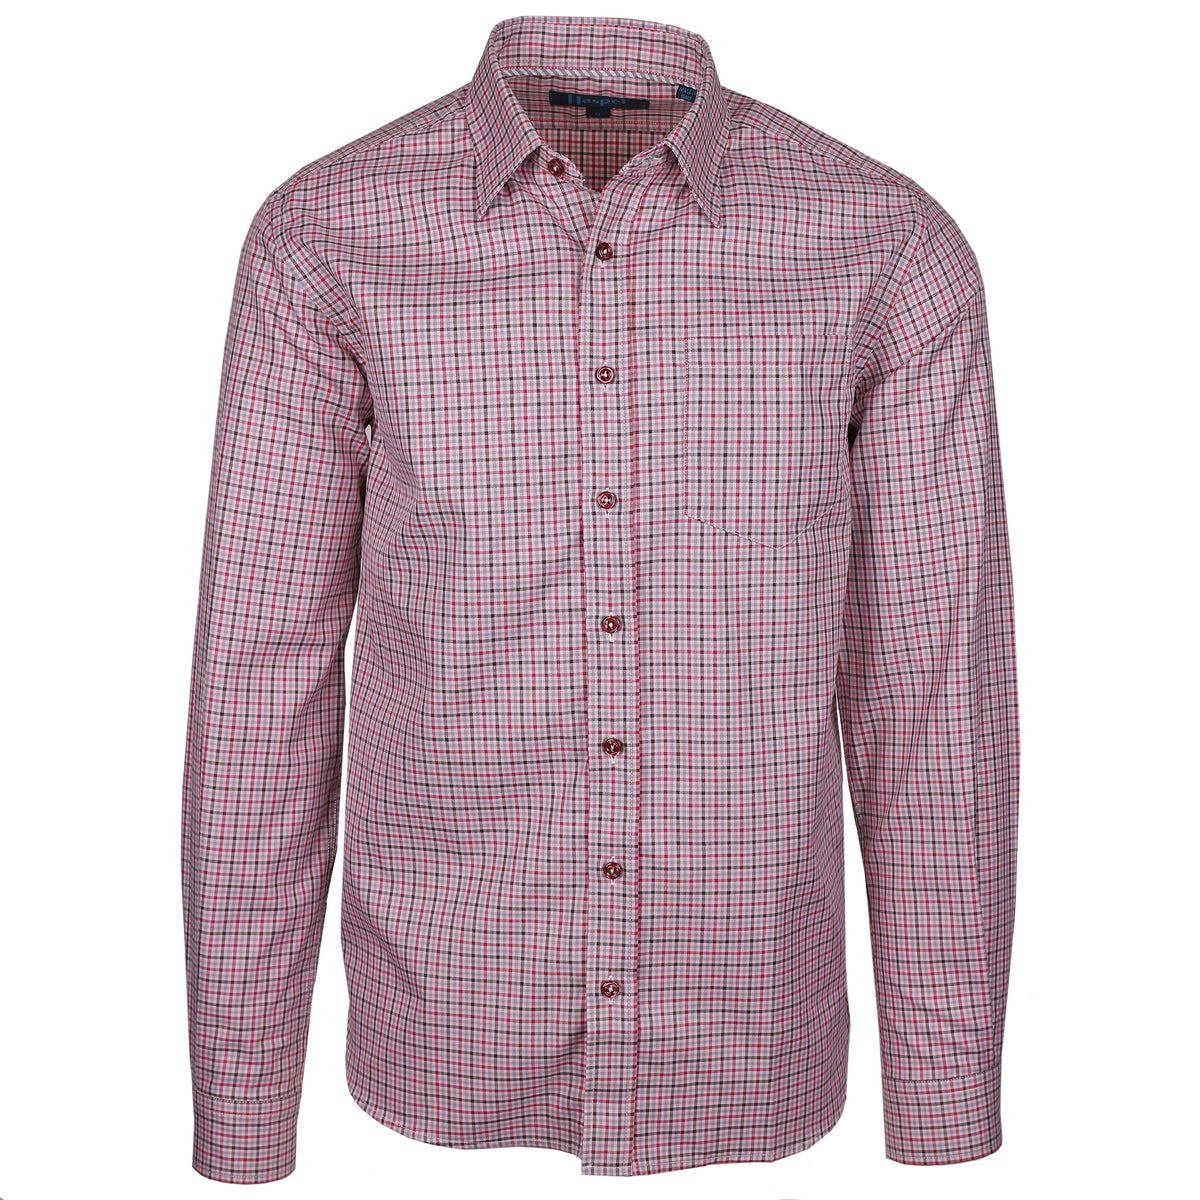 Treme&#39;s Rose Plaid shirt is perfect for adding a subtle hint of color to your outfit. Constructed of soft and breathable fabric, this classic shirt features a rose plaid design with rosy buttons, perfect for the fashionable dresser.  100% Cotton • Hidden Button Collar • Long Sleeve • Chest Pocket • Machine Washable • Made in Italy • Return Policy